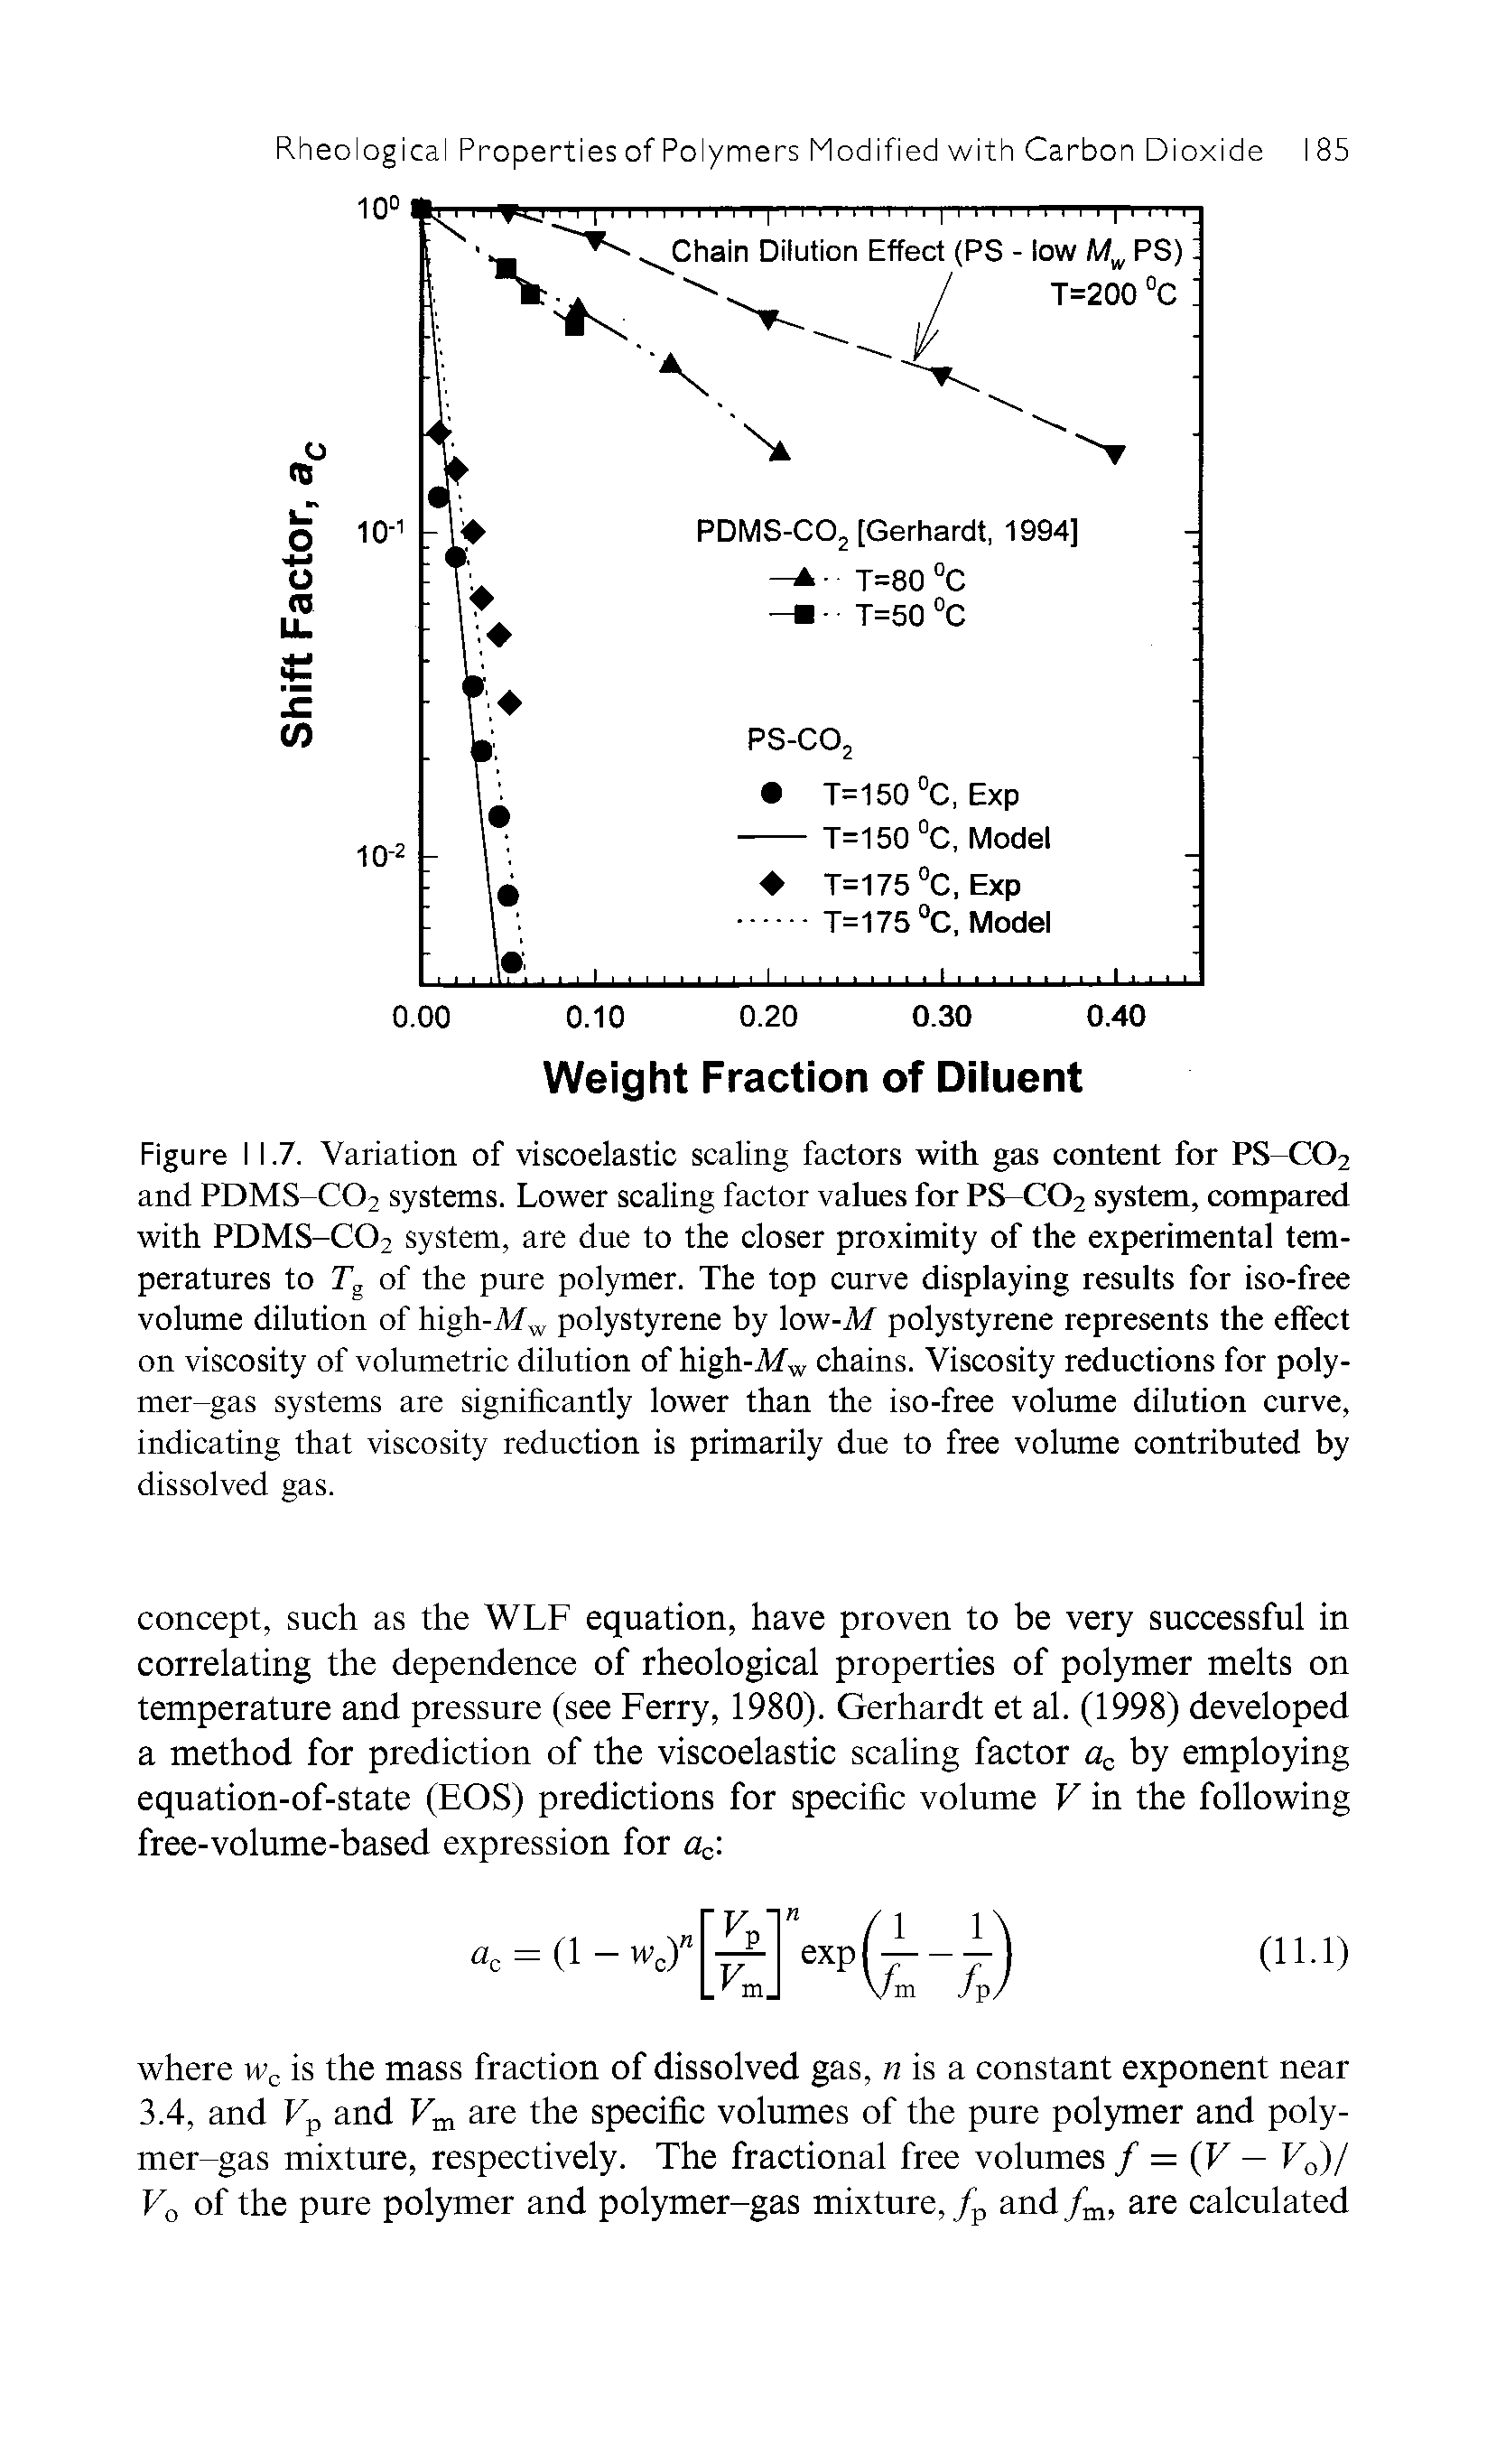 Figure I 1.7. Variation of viscoelastic scaling factors with gas content for PS-C02 and PDMS-C02 systems. Lower scaling factor values for PS-C02 system, compared with PDMS-C02 system, are due to the closer proximity of the experimental temperatures to Tg of the pure polymer. The top curve displaying results for iso-free volume dilution of high-Mw polystyrene by low-Af polystyrene represents the effect on viscosity of volumetric dilution of high-Mw chains. Viscosity reductions for polymer-gas systems are significantly lower than the iso-free volume dilution curve, indicating that viscosity reduction is primarily due to free volume contributed by dissolved gas.